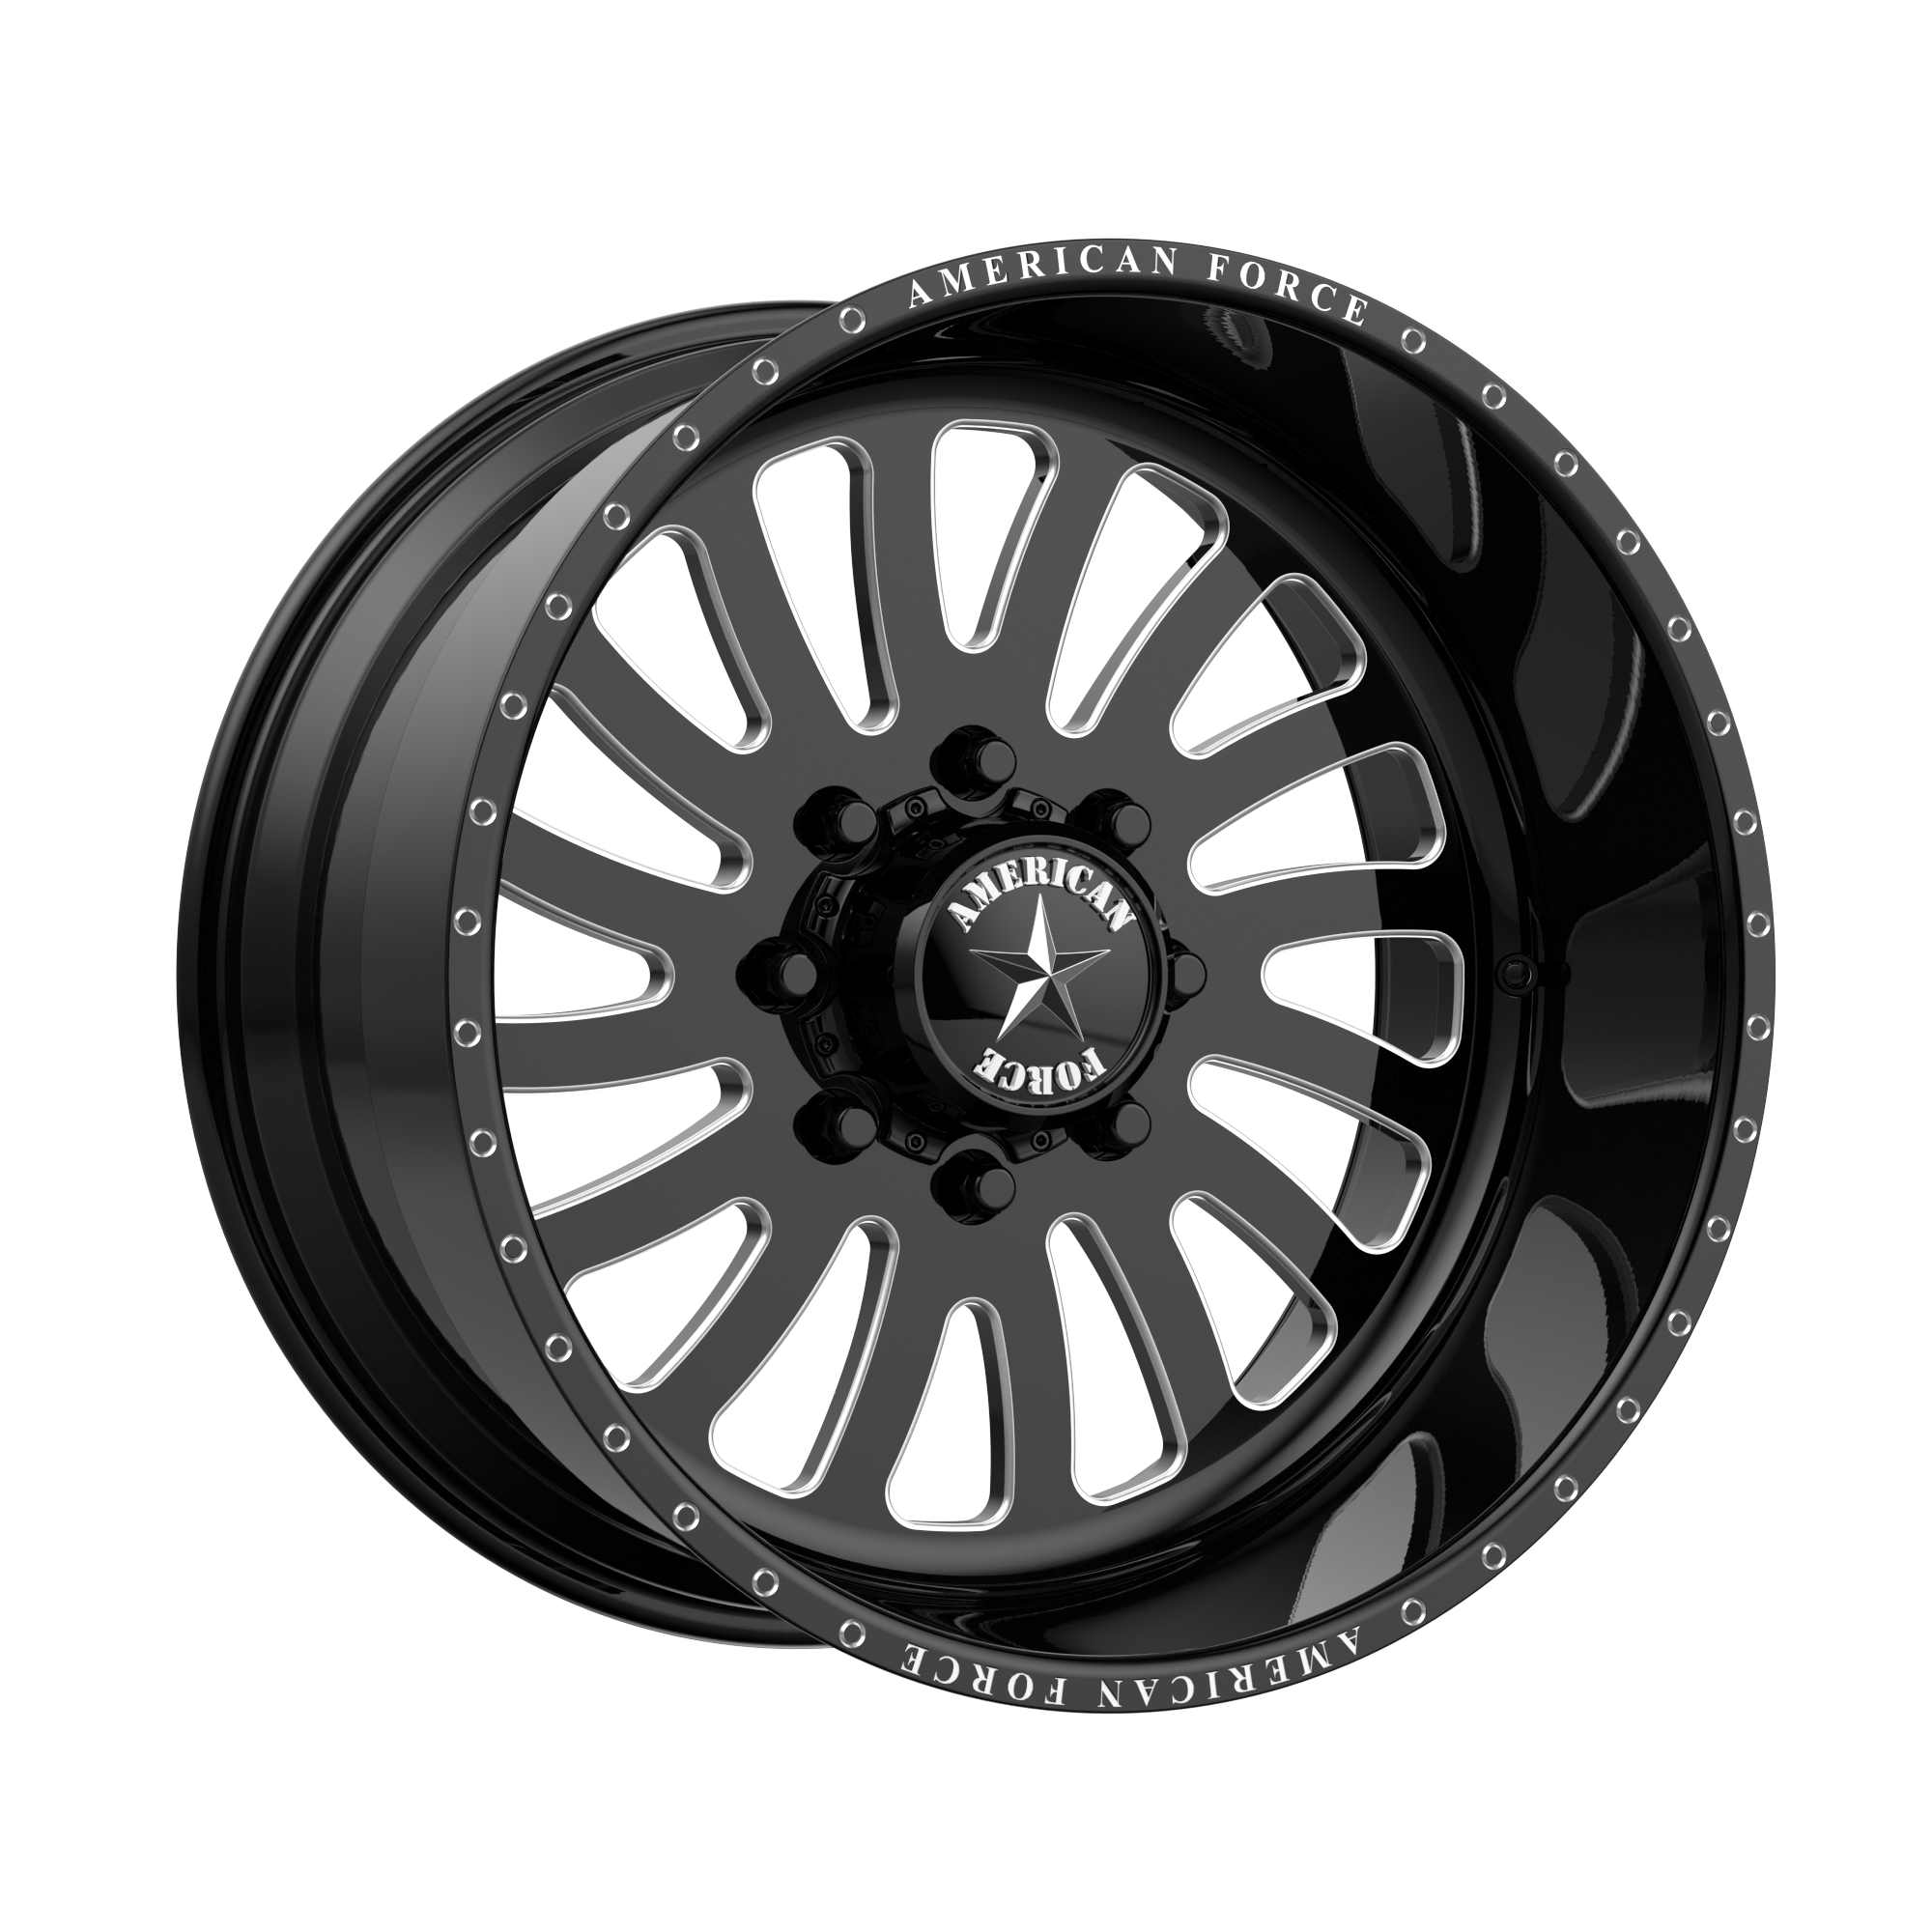 OCTANE SS 22x16 6x135.00 GLOSS BLACK MACHINED (-101 mm) - Tires and Engine Performance